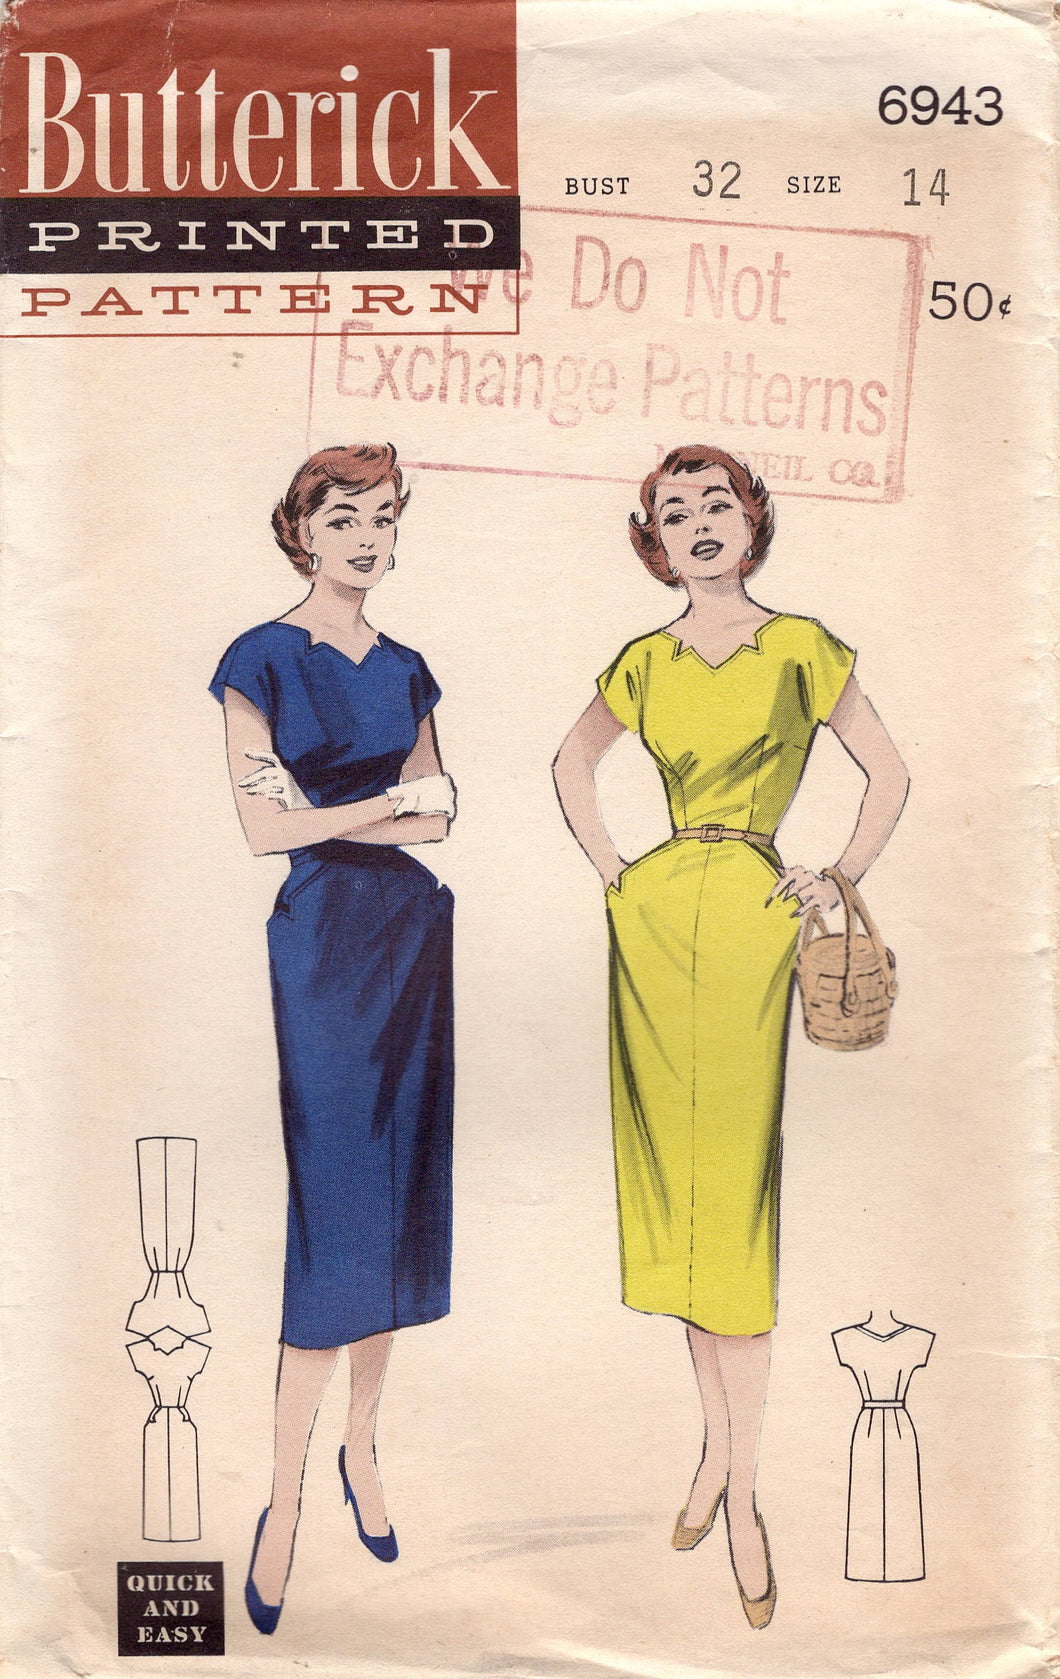 1950's Butterick Sheath Dress Pattern with Notched Neckline and Pockets - Bust 32